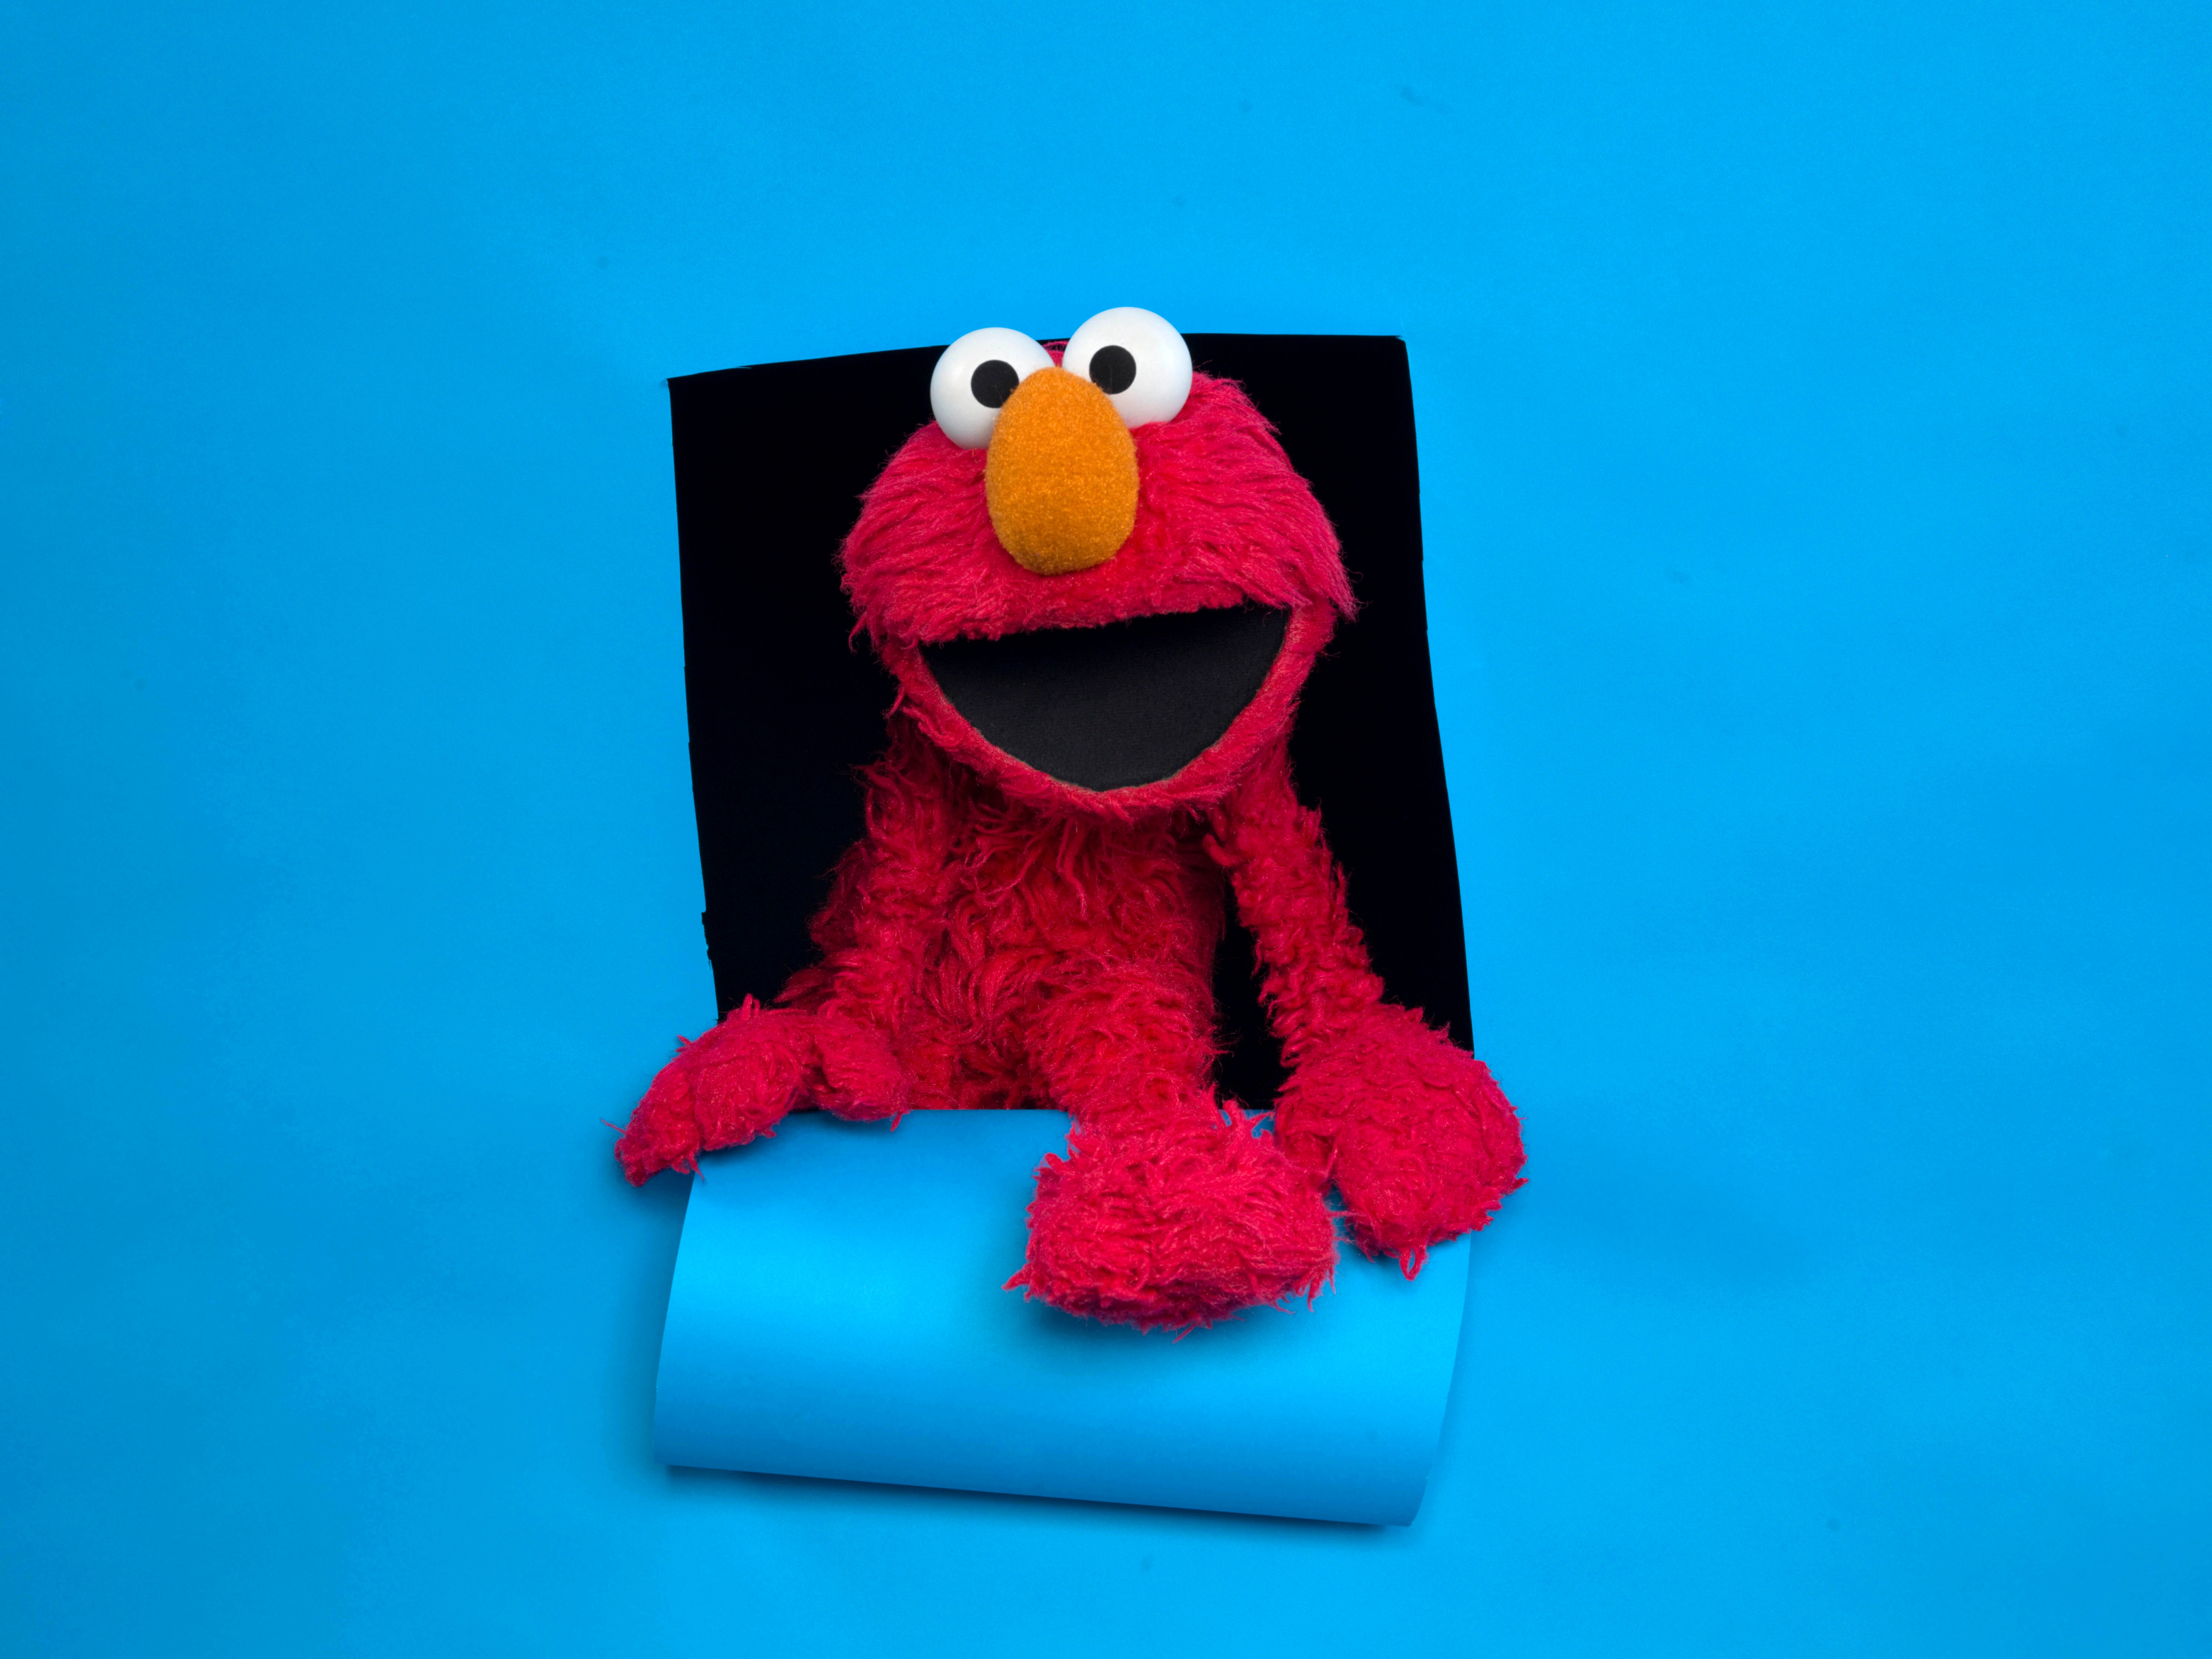 Elmo is getting his own talk show: 'The Too Late Show With Elmo'